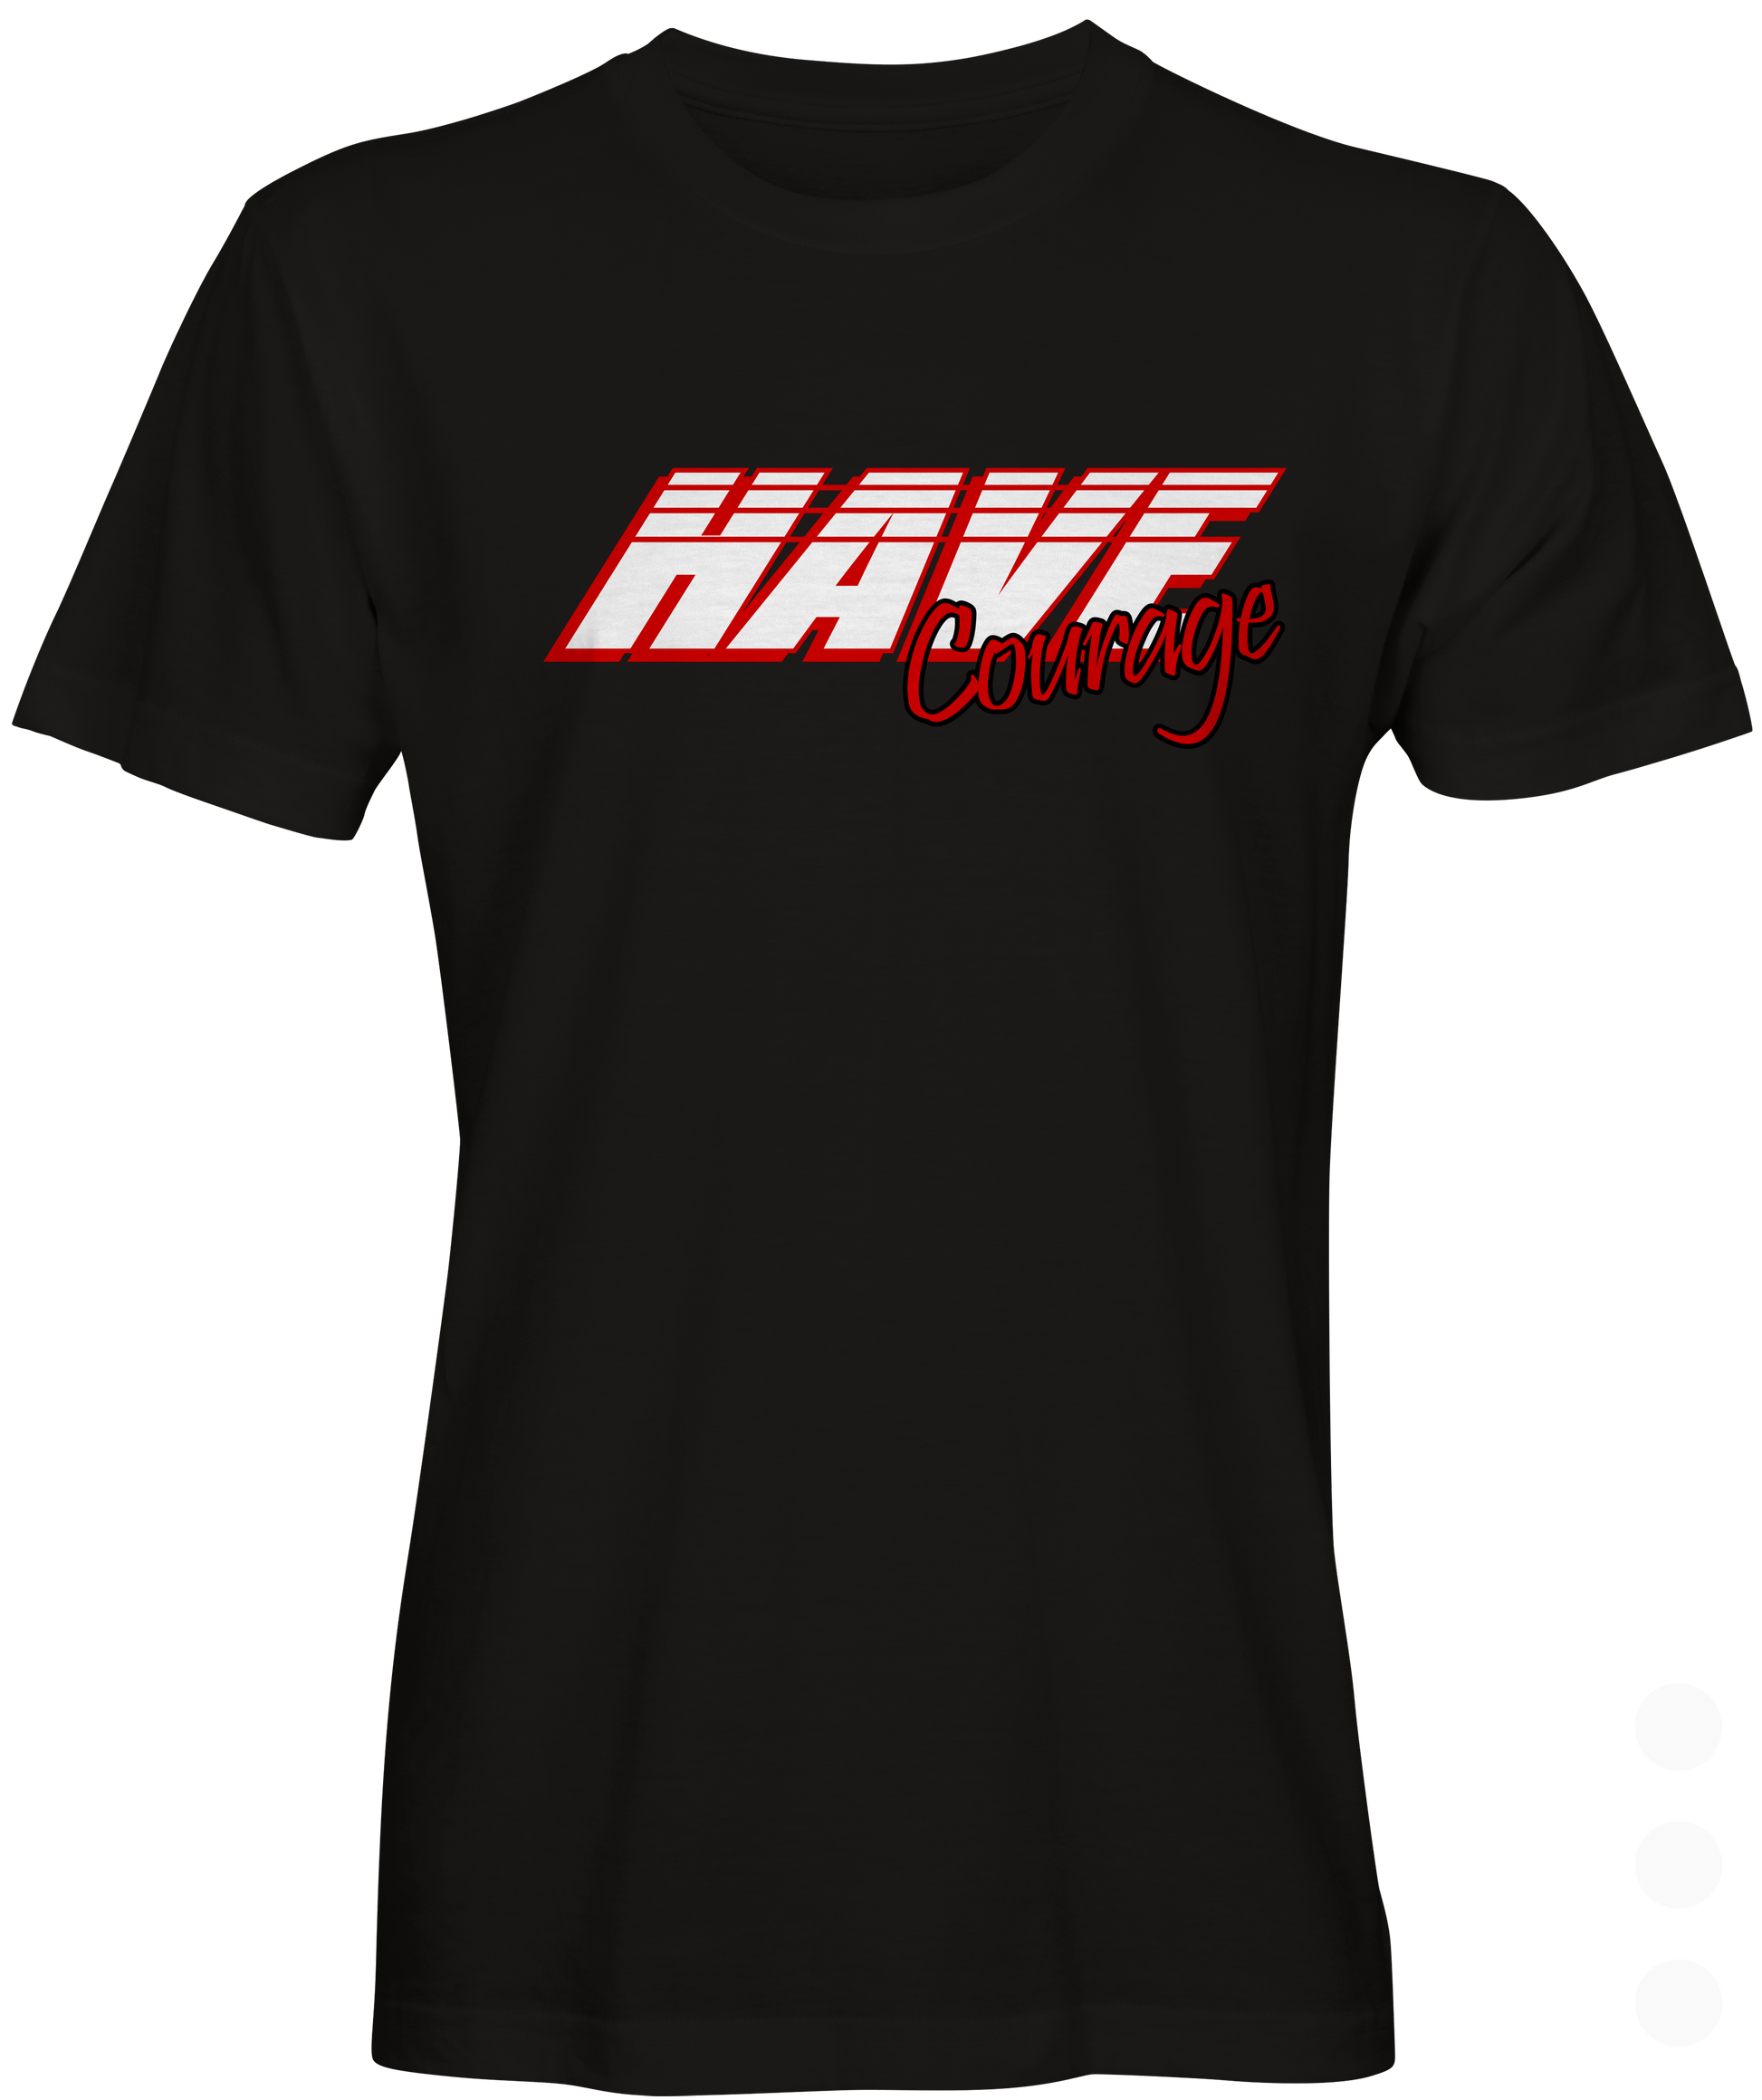 Have Courage Graphic T-shirt